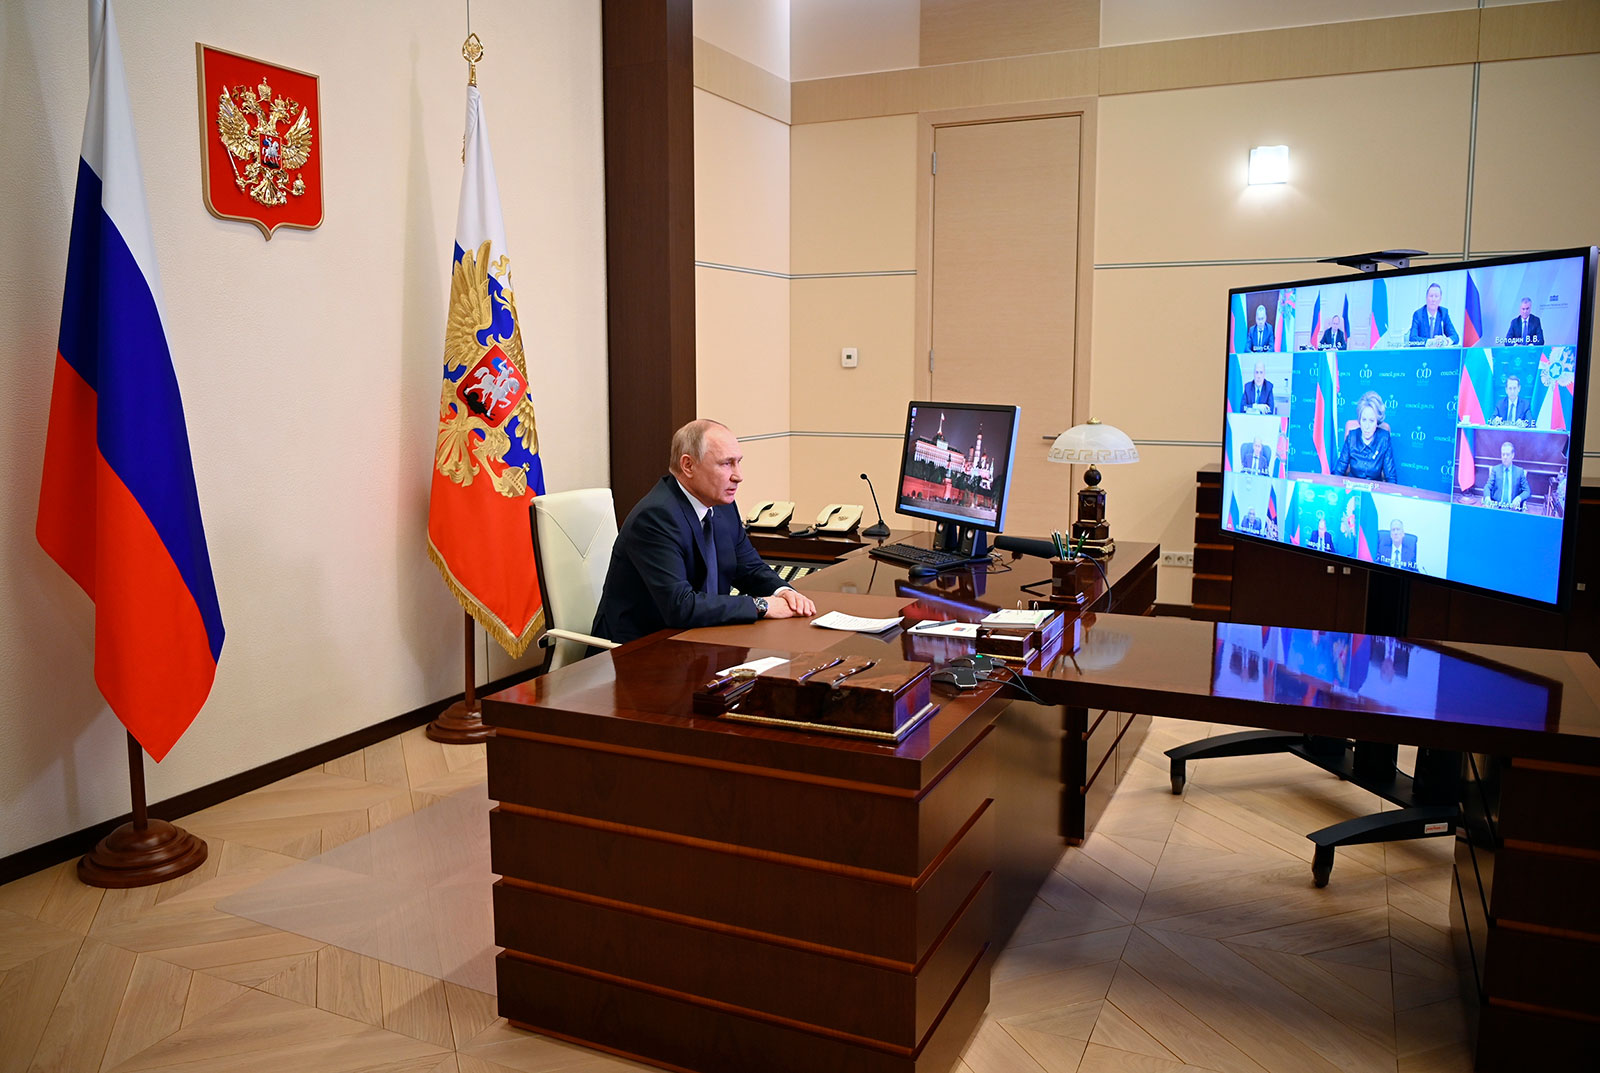 Russian President Vladimir Putin meets virtually with members of his security council in Moscow on March 3.